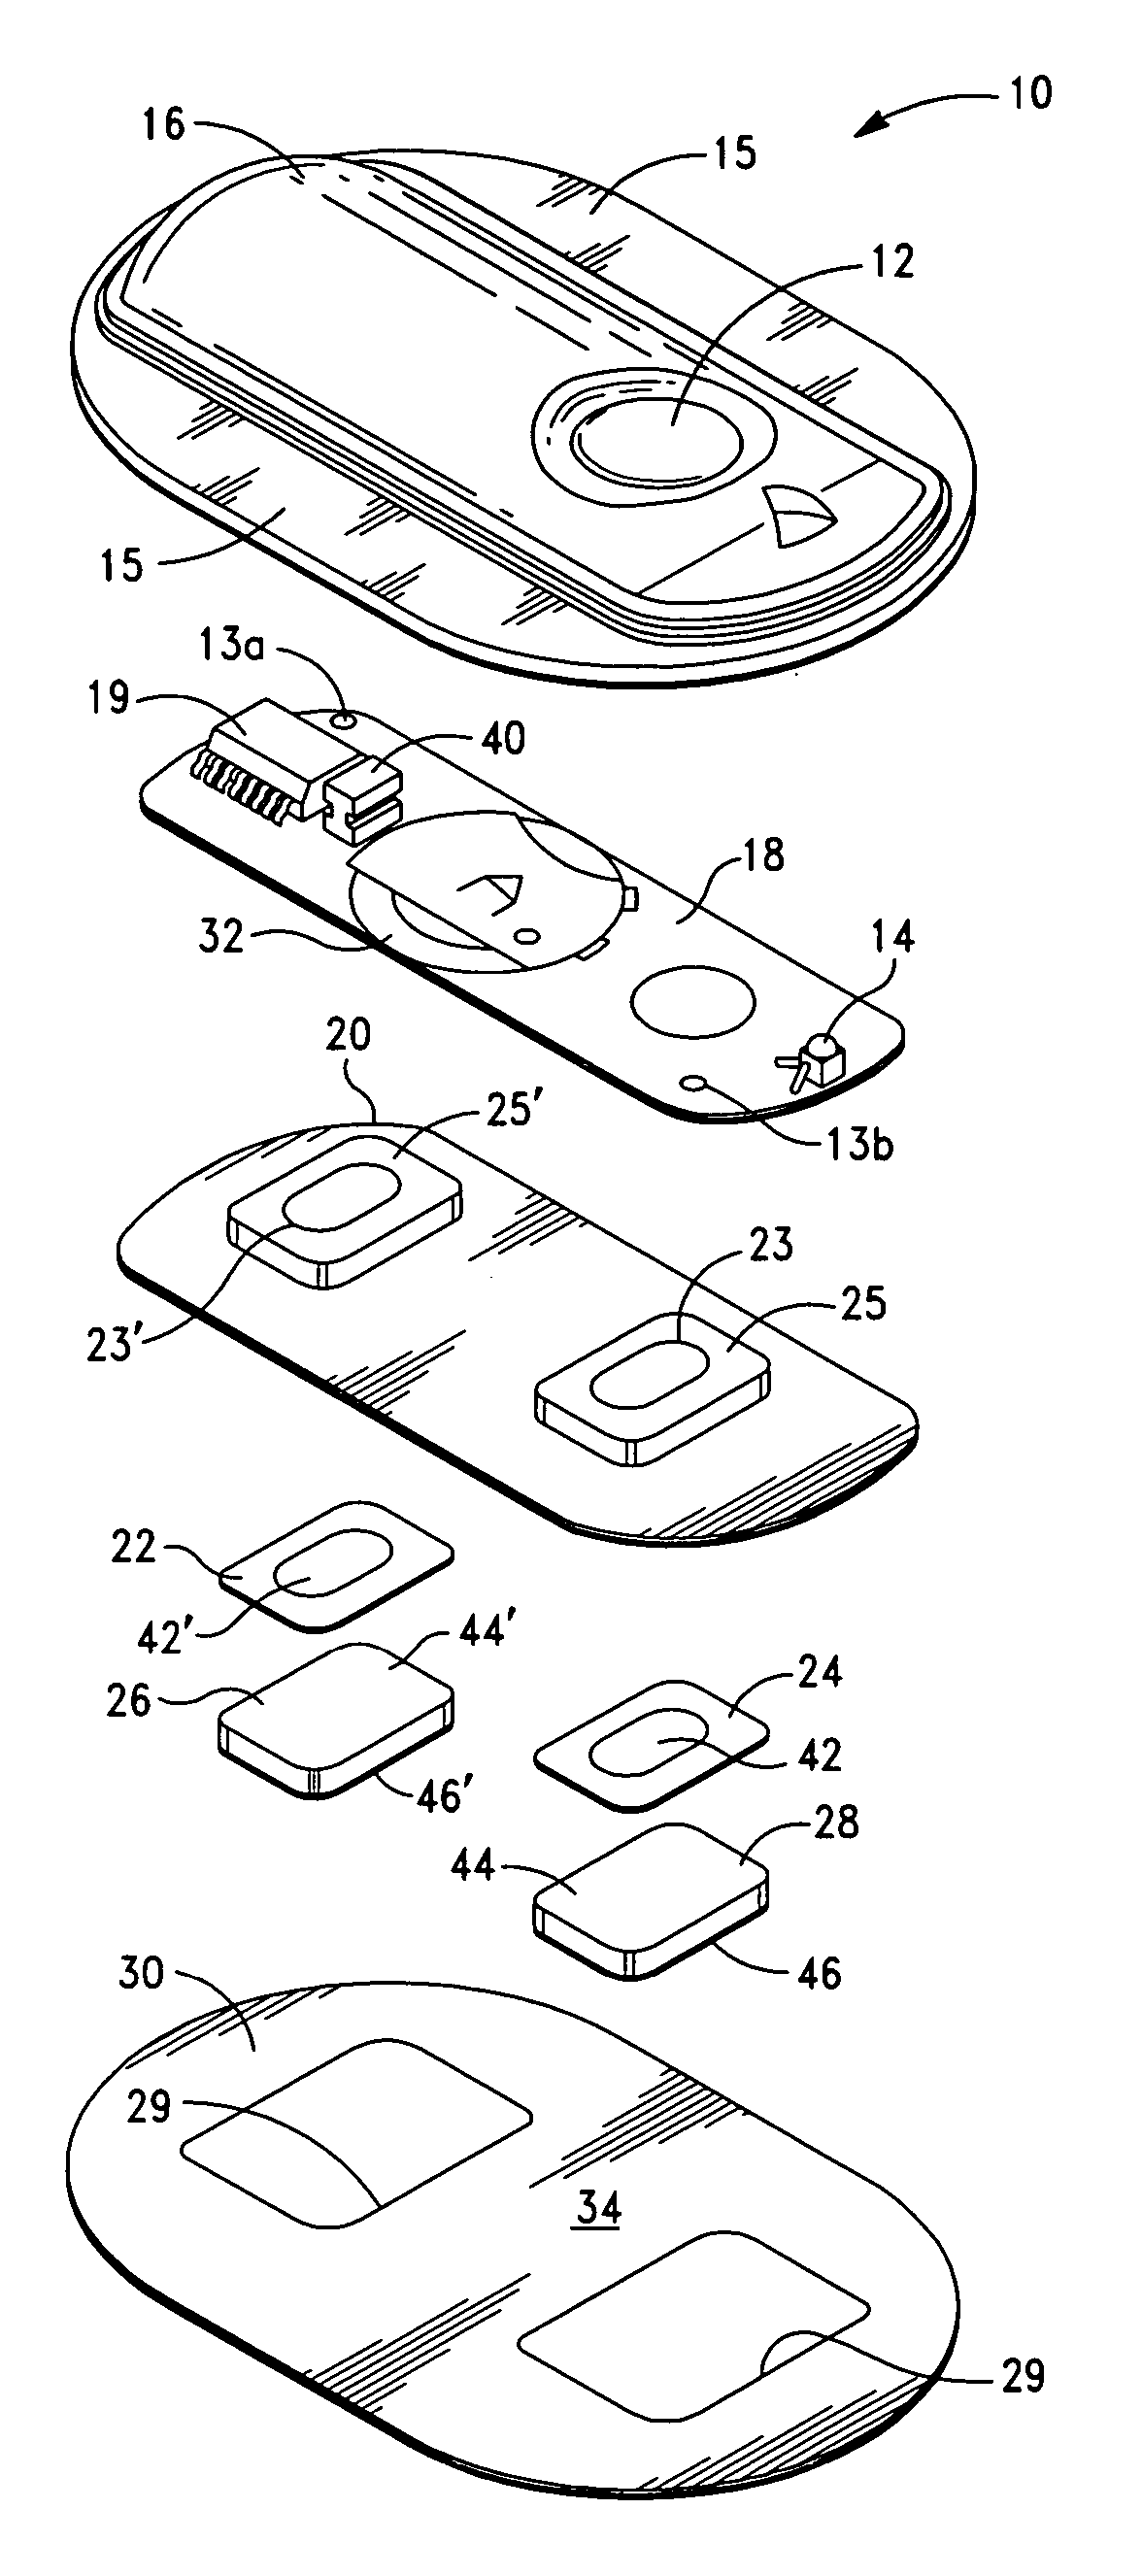 System and method for transdermal delivery of an anticoagulant